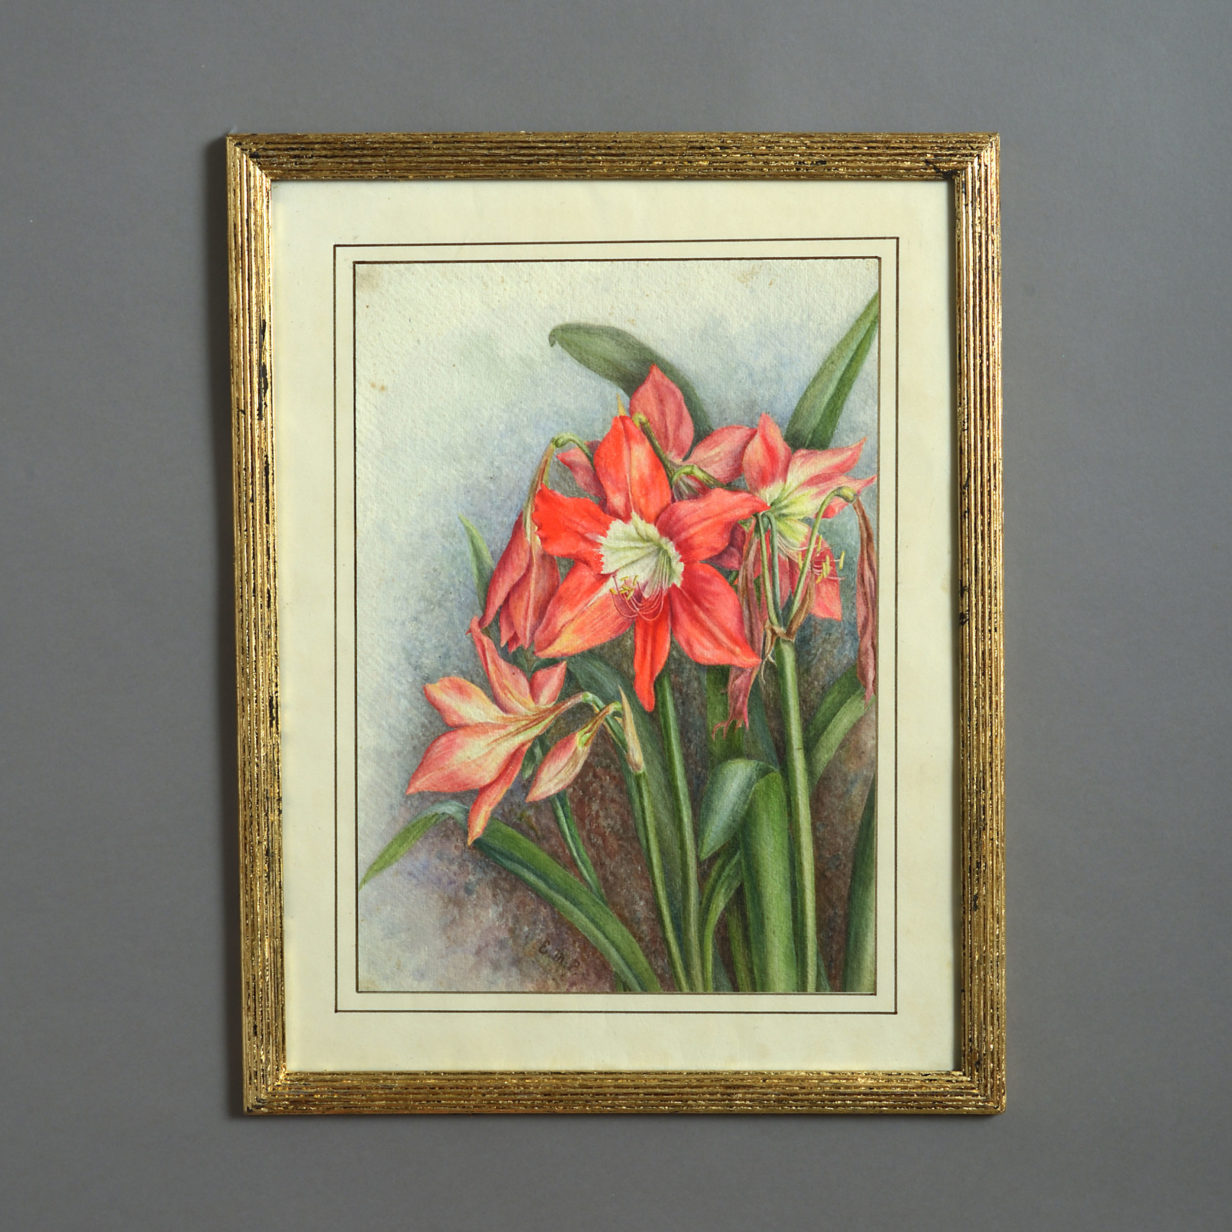 A late 19th century botanical watercolour of a red lily